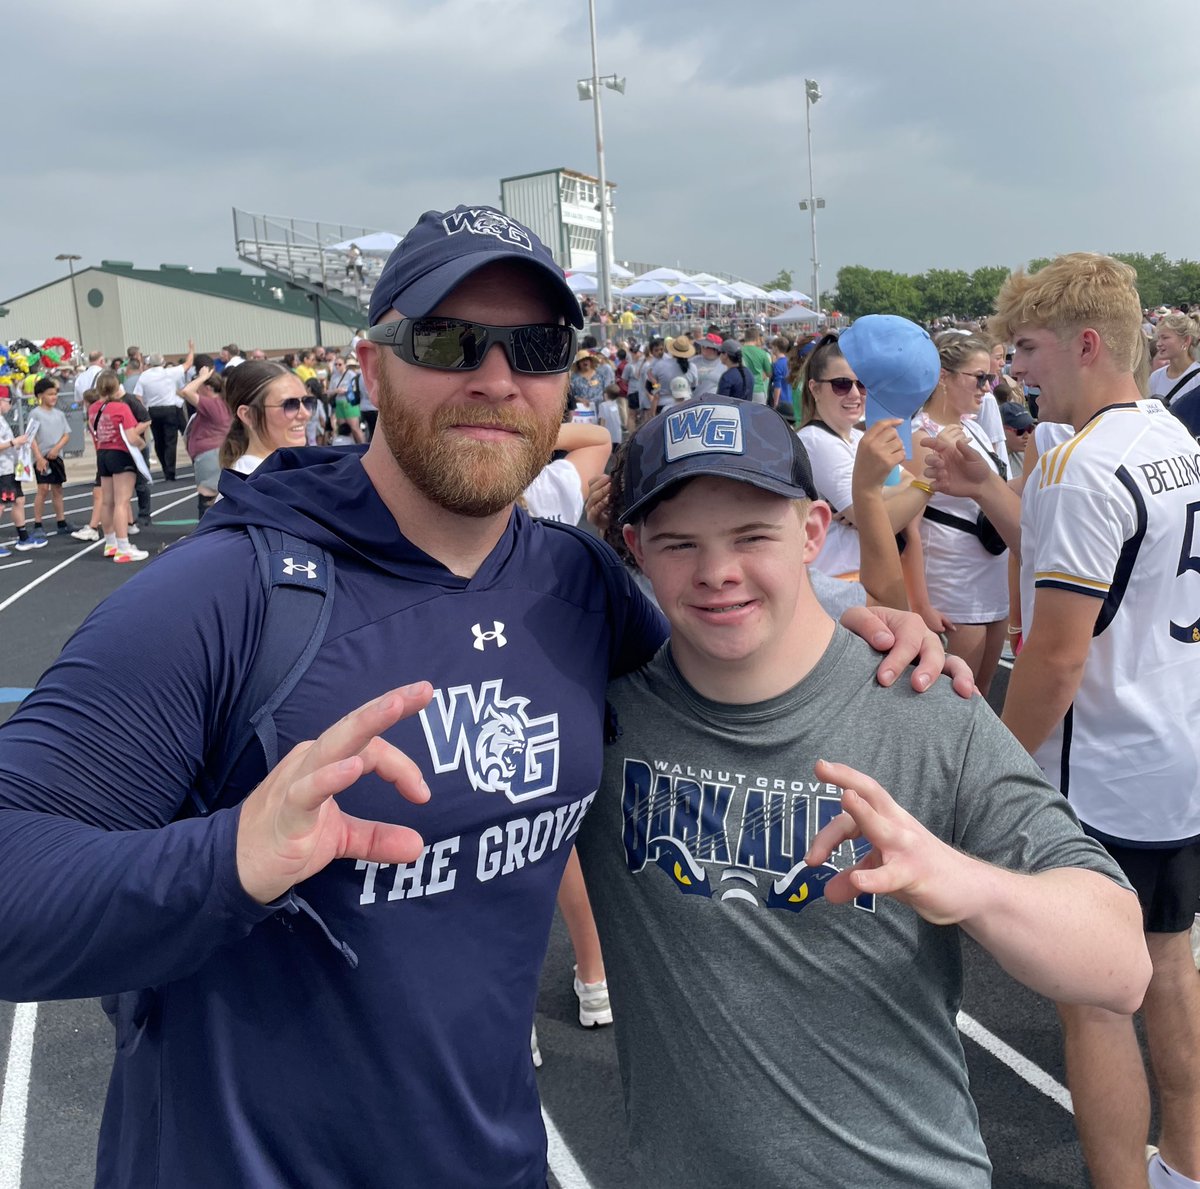 I knew he was ready to roll when I saw he was rocking the Dark Alley shirt! Such an awesome event by @ProsperISD! @SpecialOlympics track was a blast! Love seeing these guys compete!